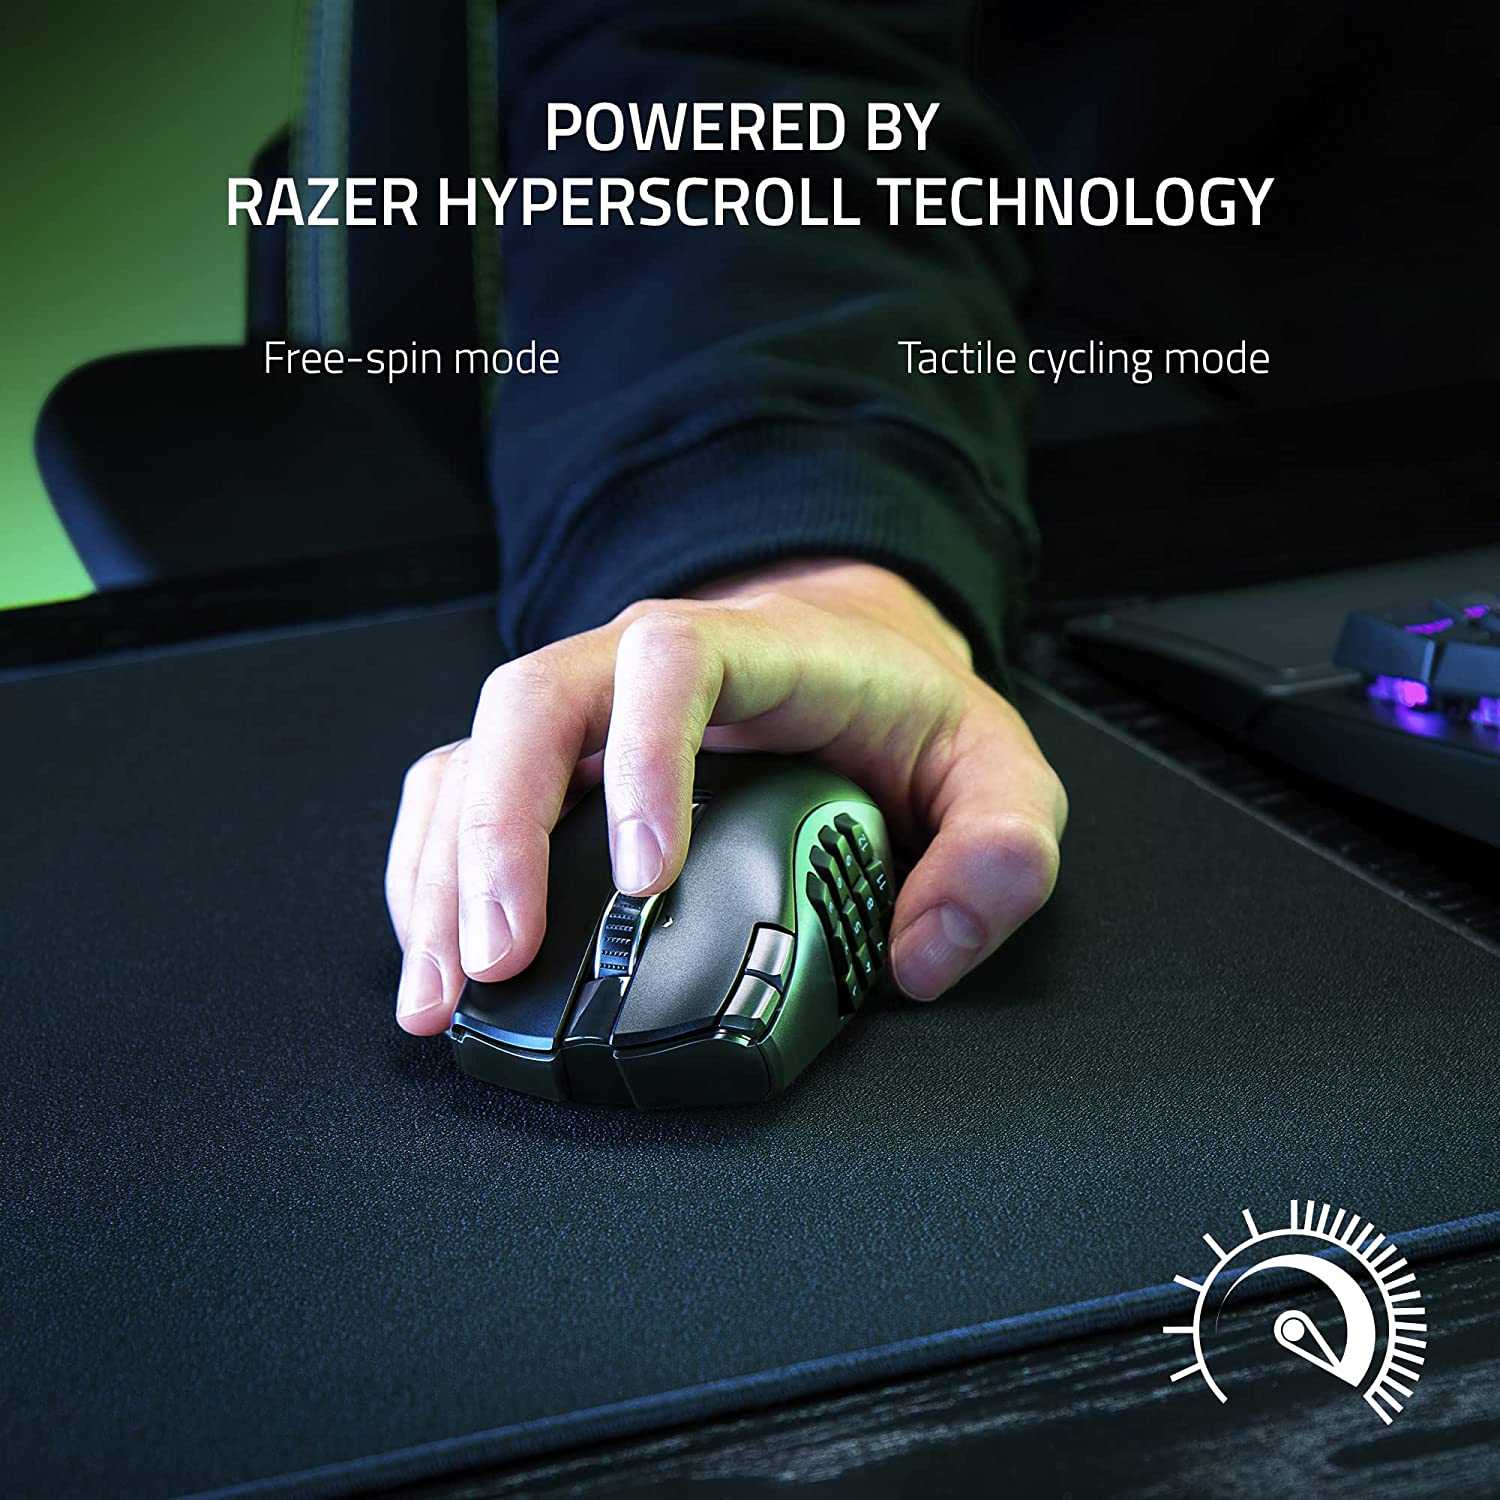 Razer Naga V2 HyperSpeed Ergonomic Wireless MMO Gaming Mouse with 19 Programmable Buttons - Black